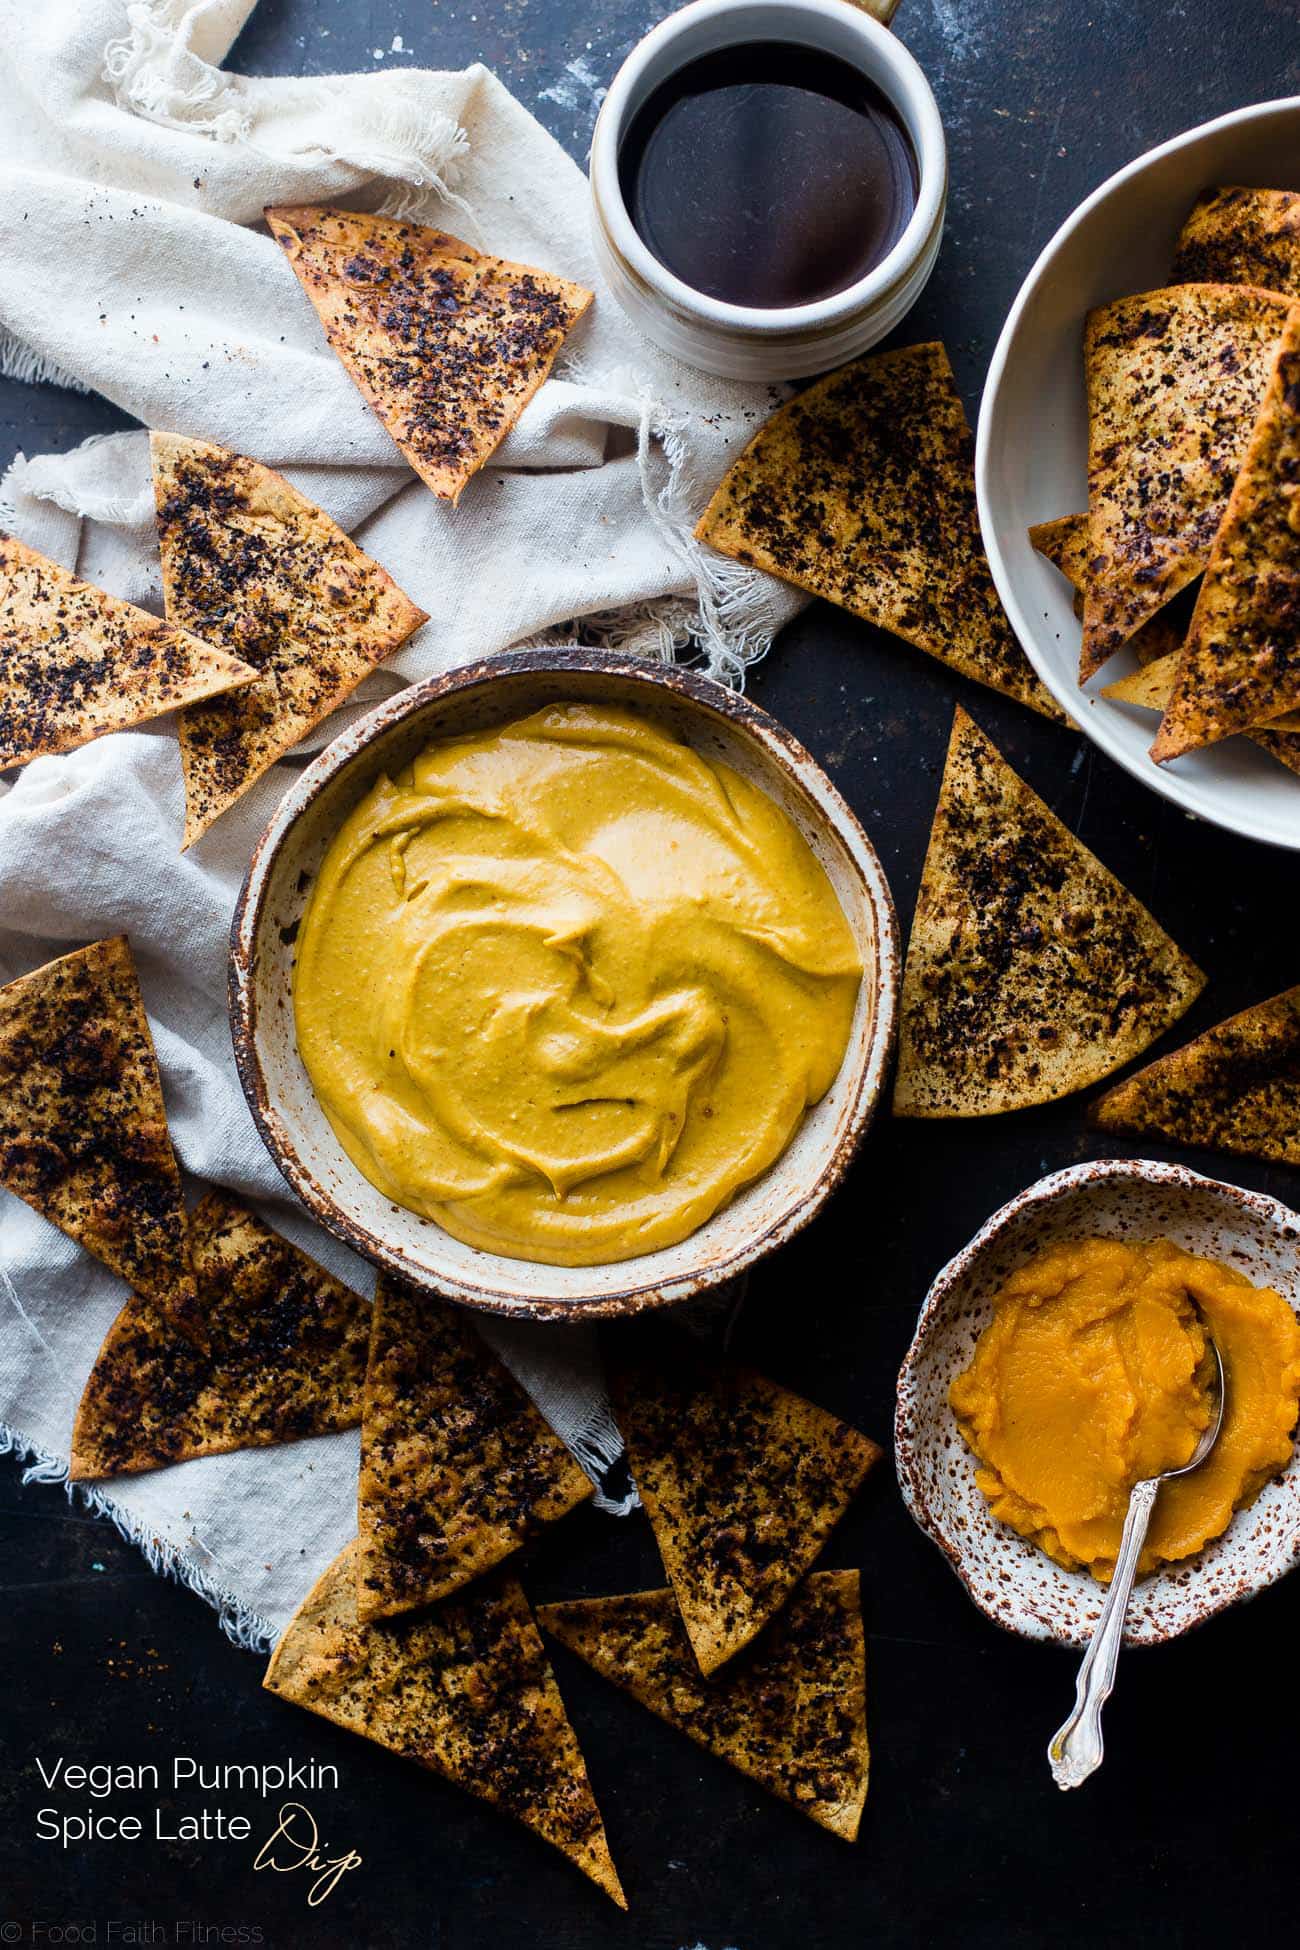 Vegan Pumpkin Spice Latte Dip - This easy healthy pumpkin pie dip is served with baked coffee chips so it tastes like a pumpkin spice latte! It's a healthy holiday dessert that is so simple to make! | Foodfaithfitness.com | @FoodFaithFIt